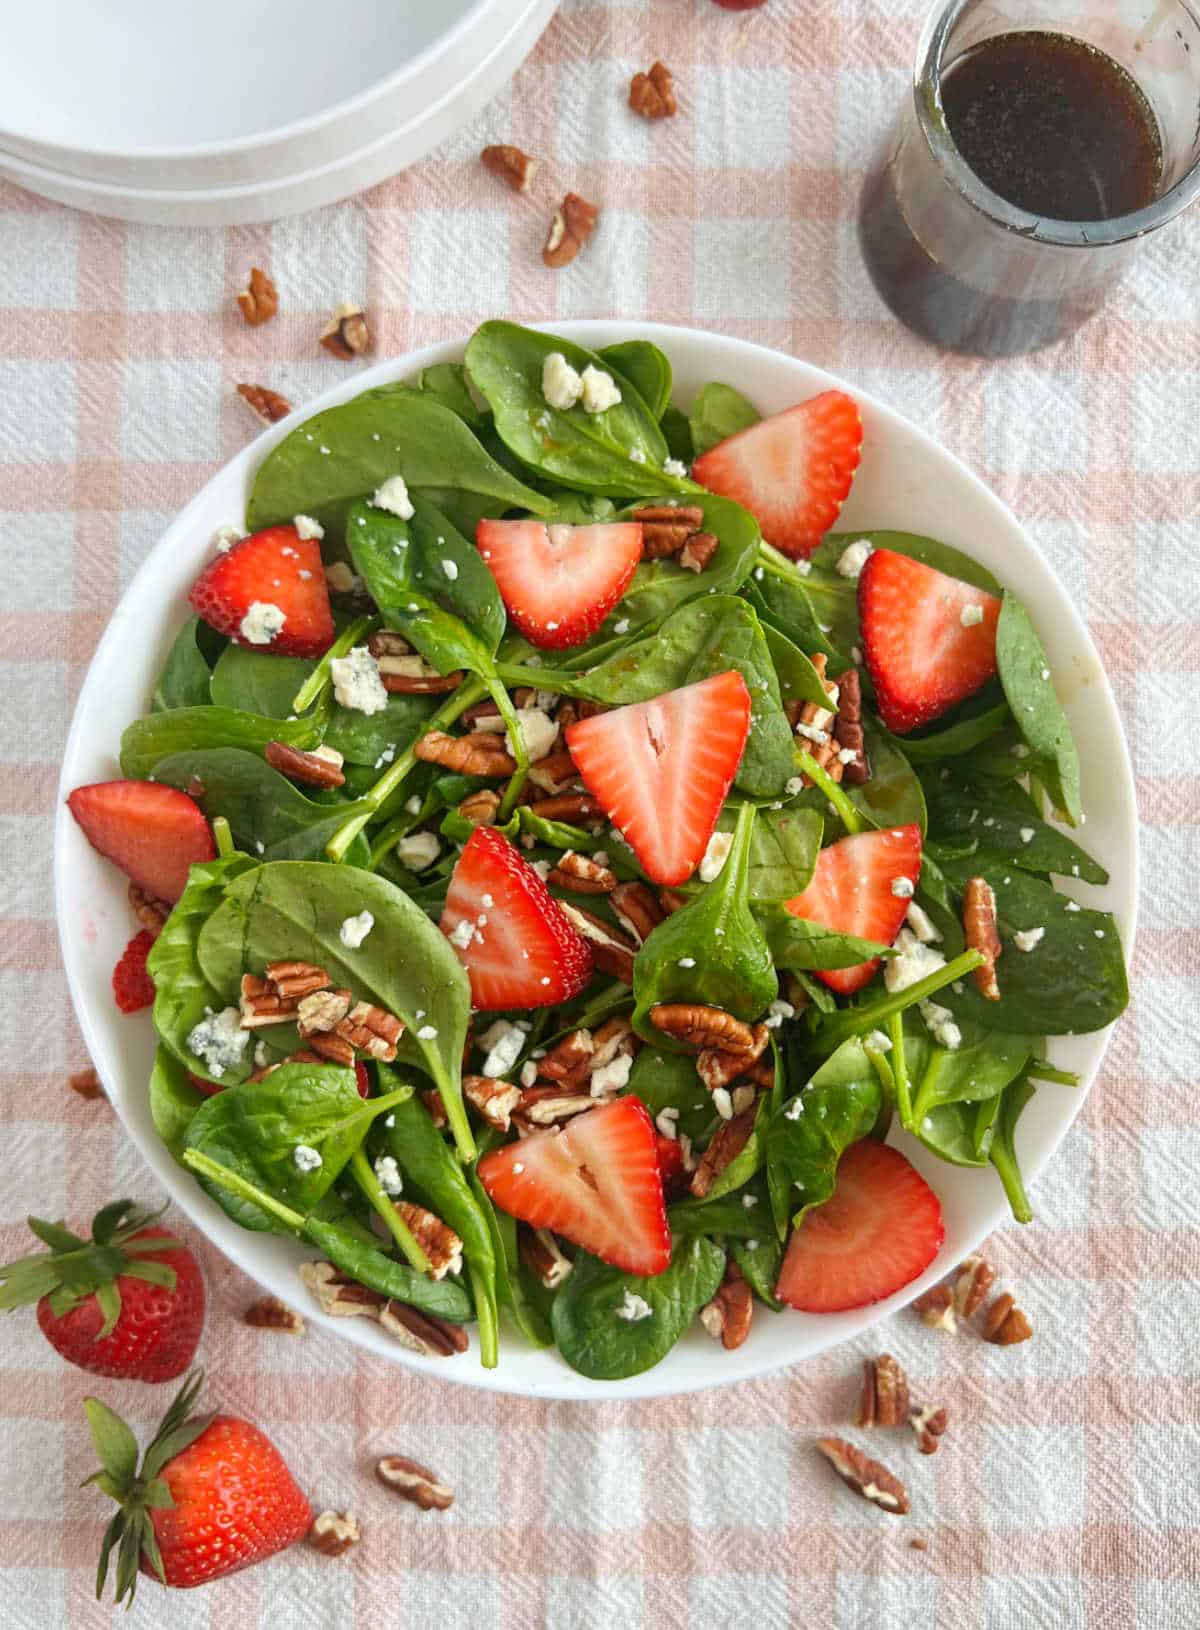 spinach salad with strawberries, gorgonzola cheese and pecans on the table.